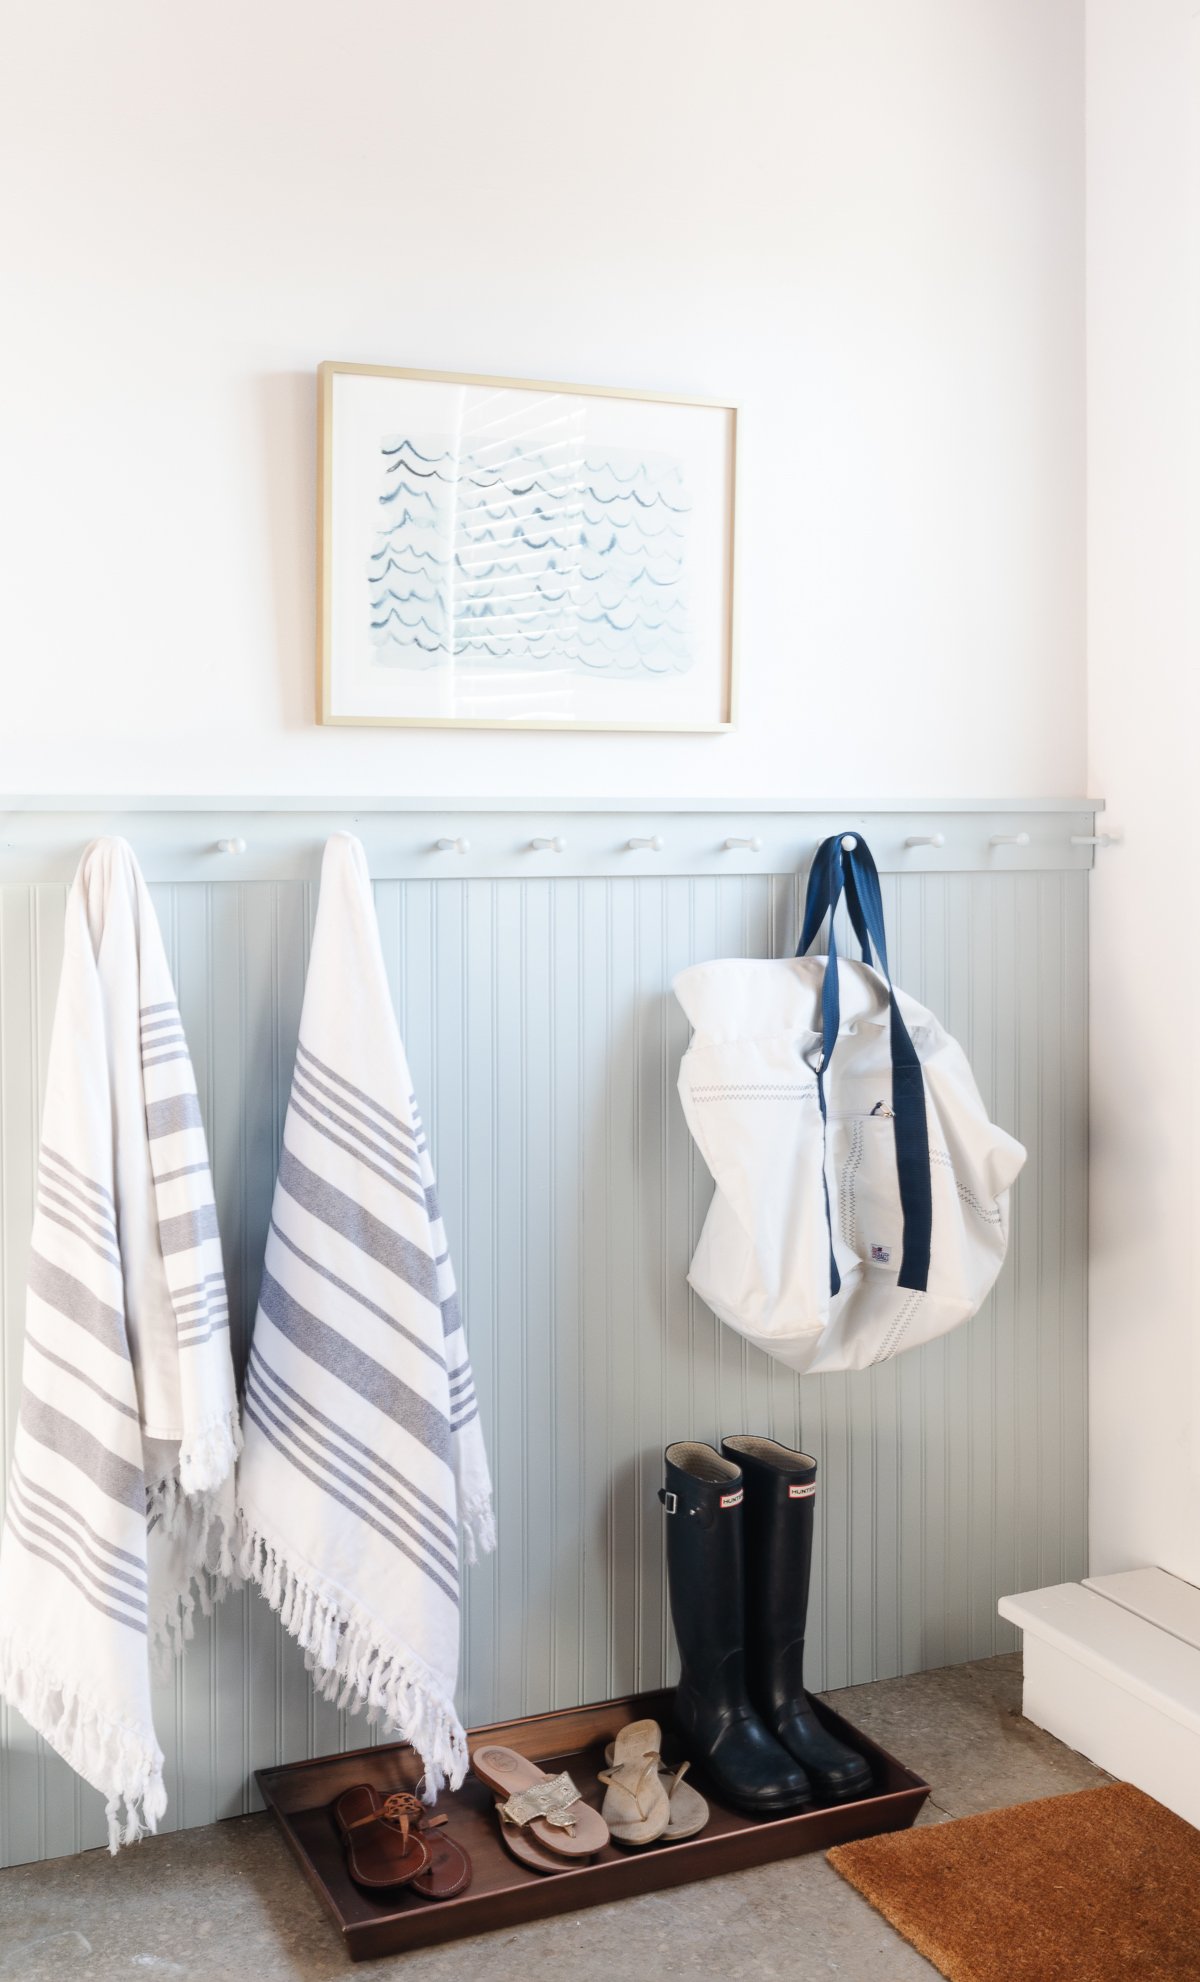 Towels and bags on hook rail